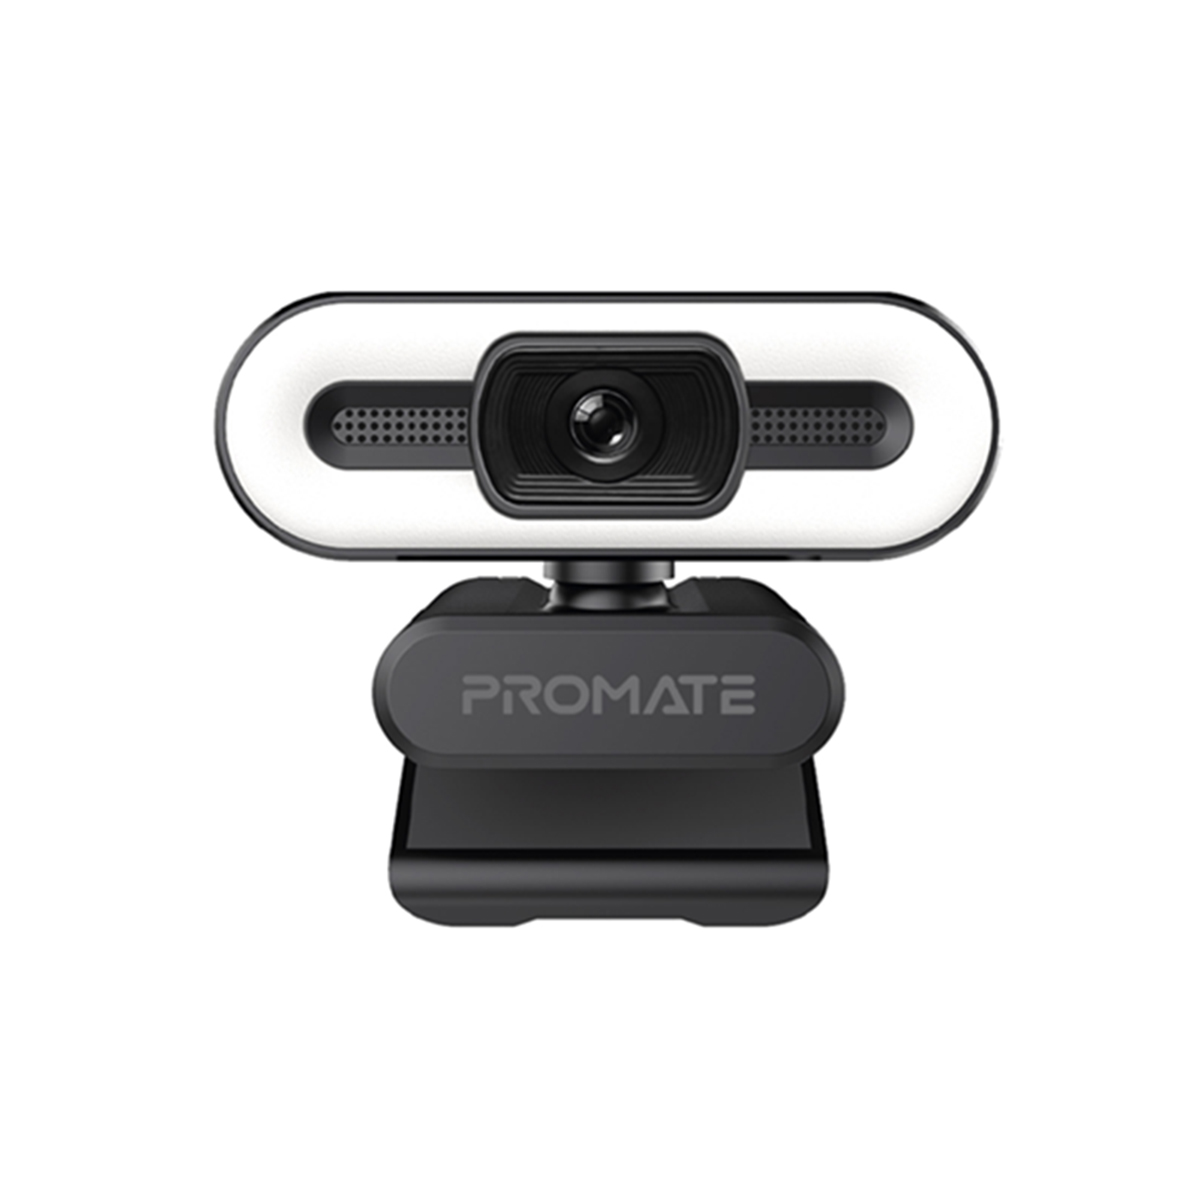 Promate Full HD Web Camera, Premium Widescreen Video Calling 1080p USB Webcam with Tripod, Noise Reduction Mic, Touch Control LED Light Modes and 90 Degree Wide-Angle for PC/ Laptop/Zoom/Skype, ProCam-3